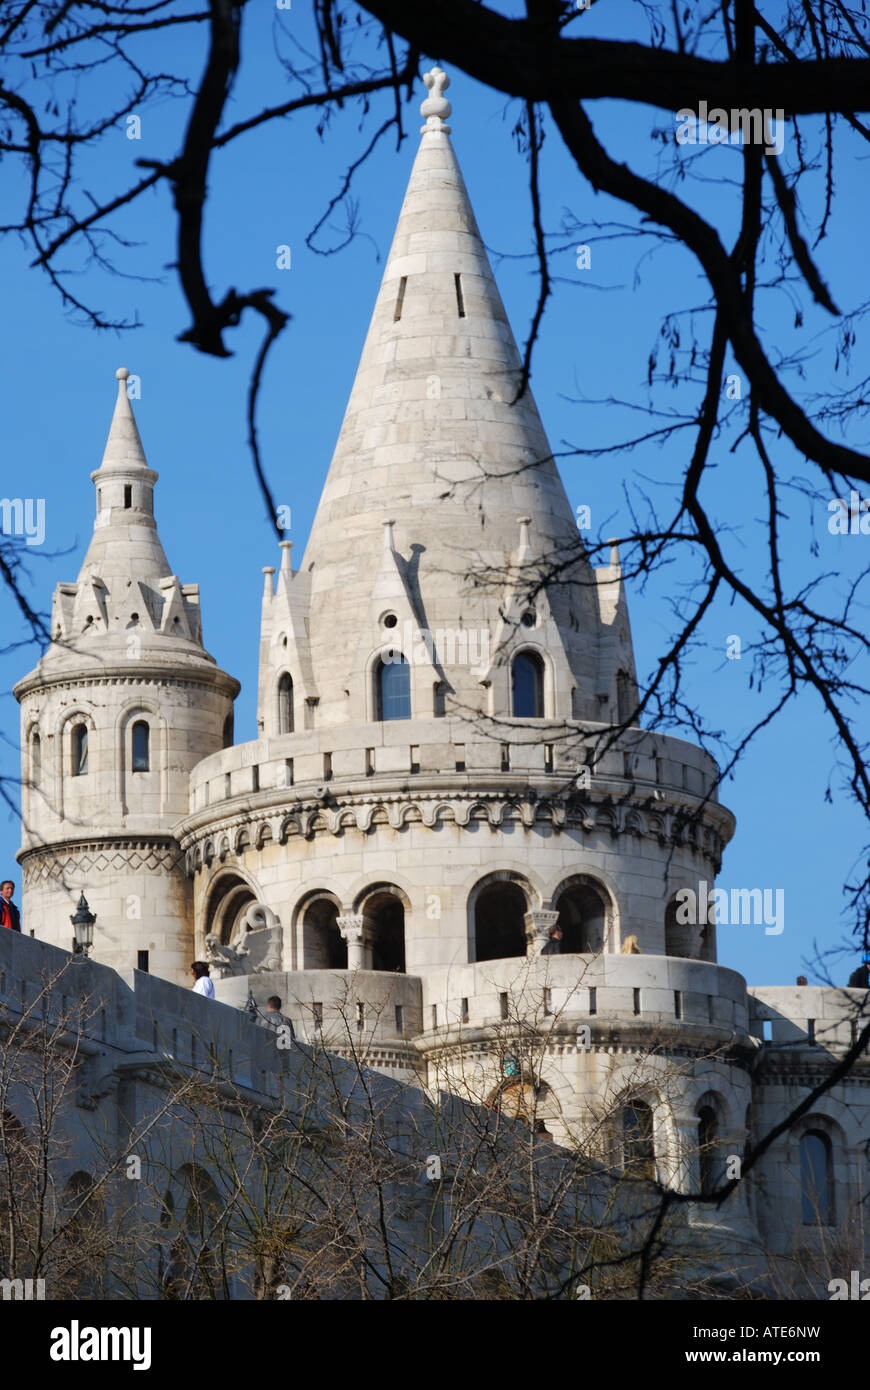 View of ramparts, Fisherman's Bastion, The Castle District, Buda, Budapest, Republic of Hungary Stock Photo